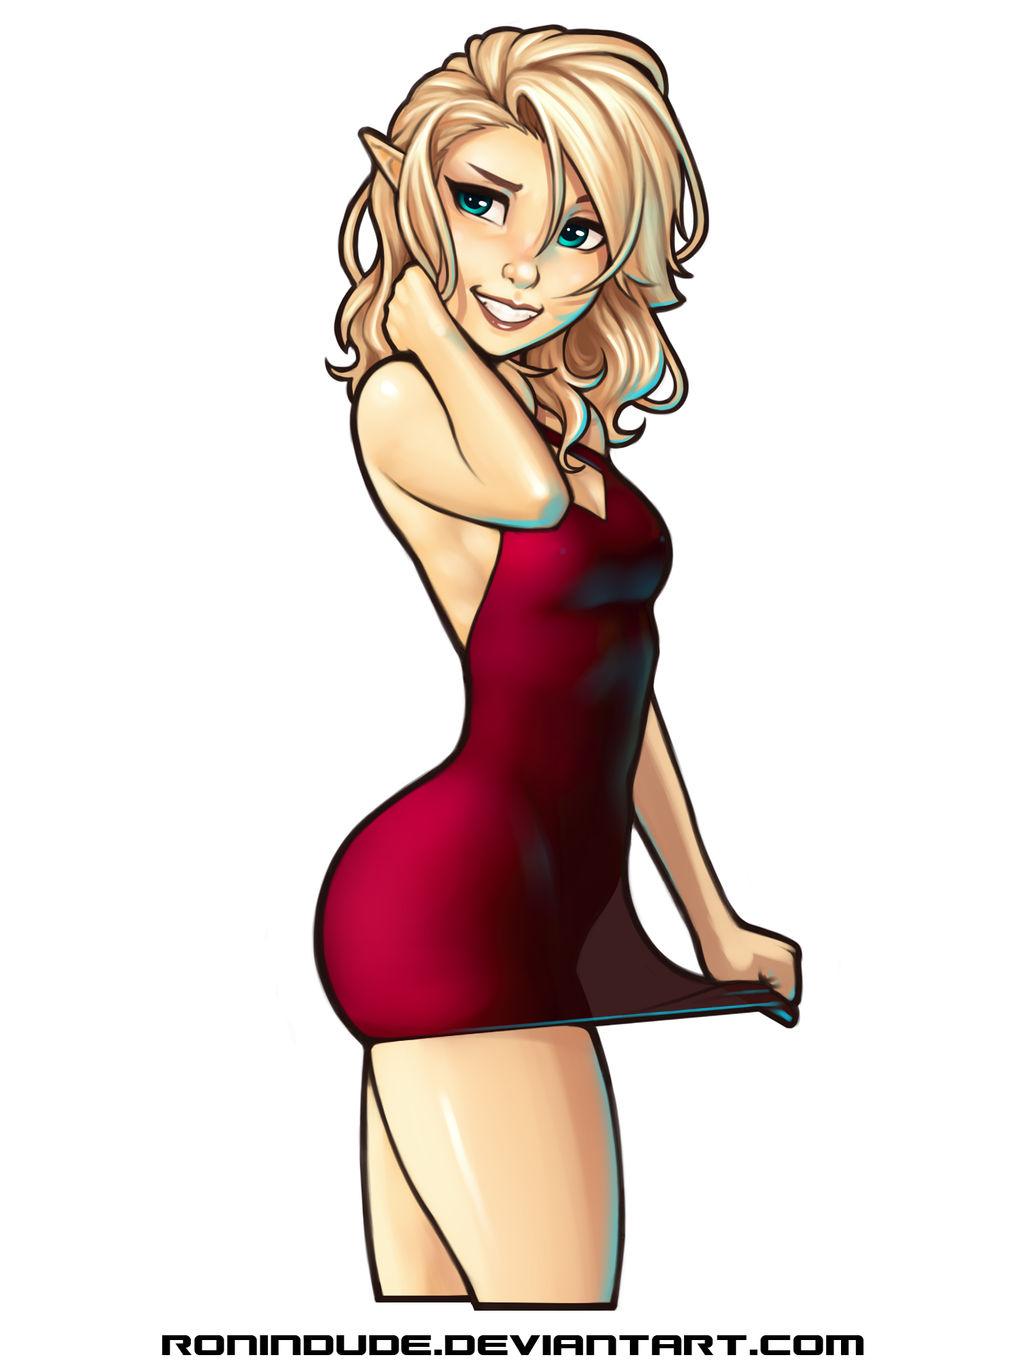 Evening Drawing - Sassy Elf in Little Red Dress